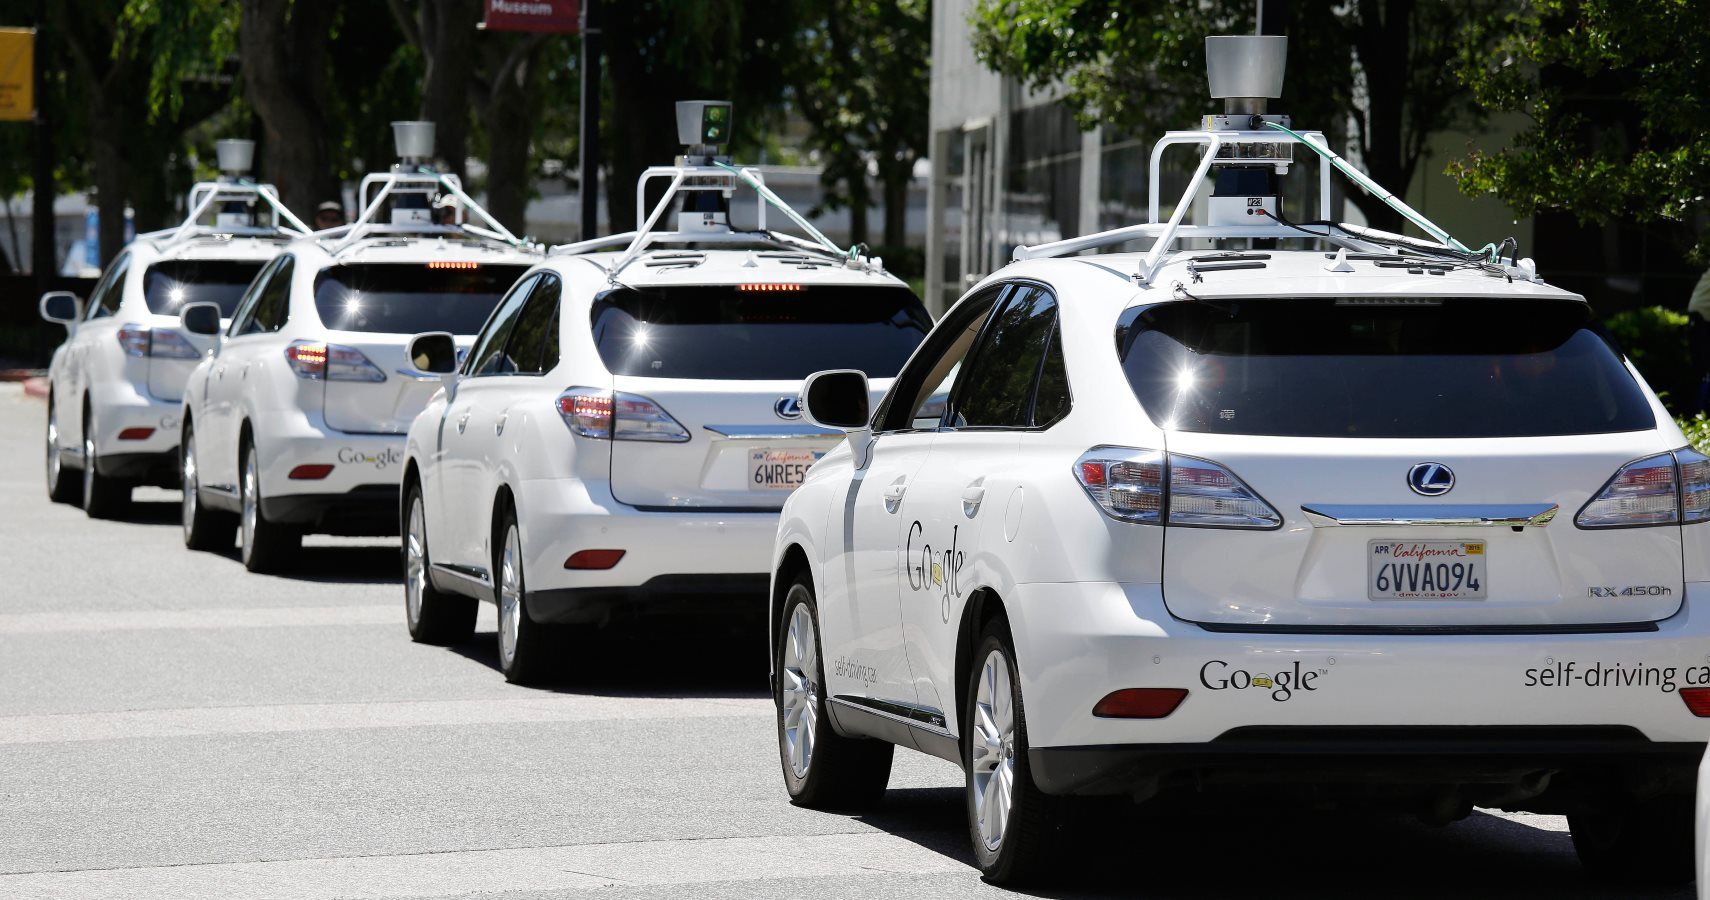 A row of Google self-driving cars in Mountain View, California